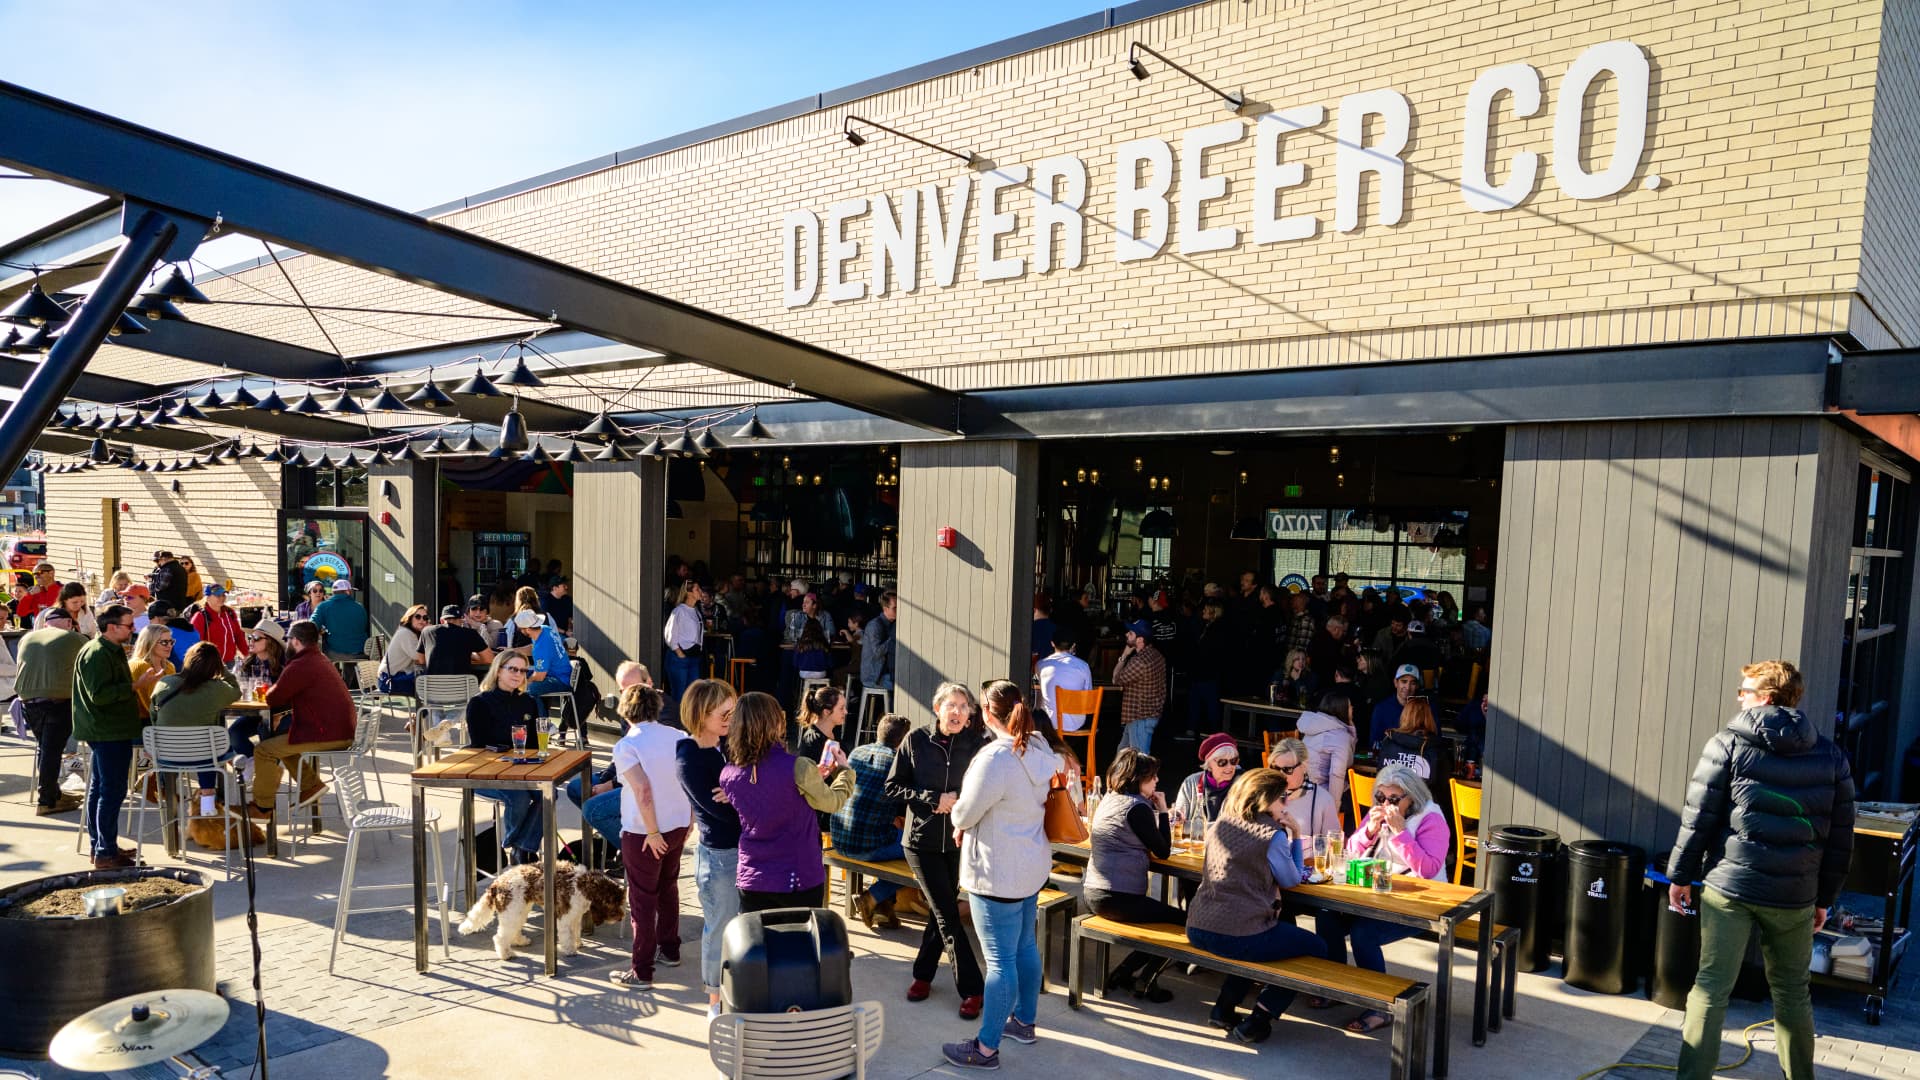 Denver and its craft breweries embrace nonalcoholic beer, spirits